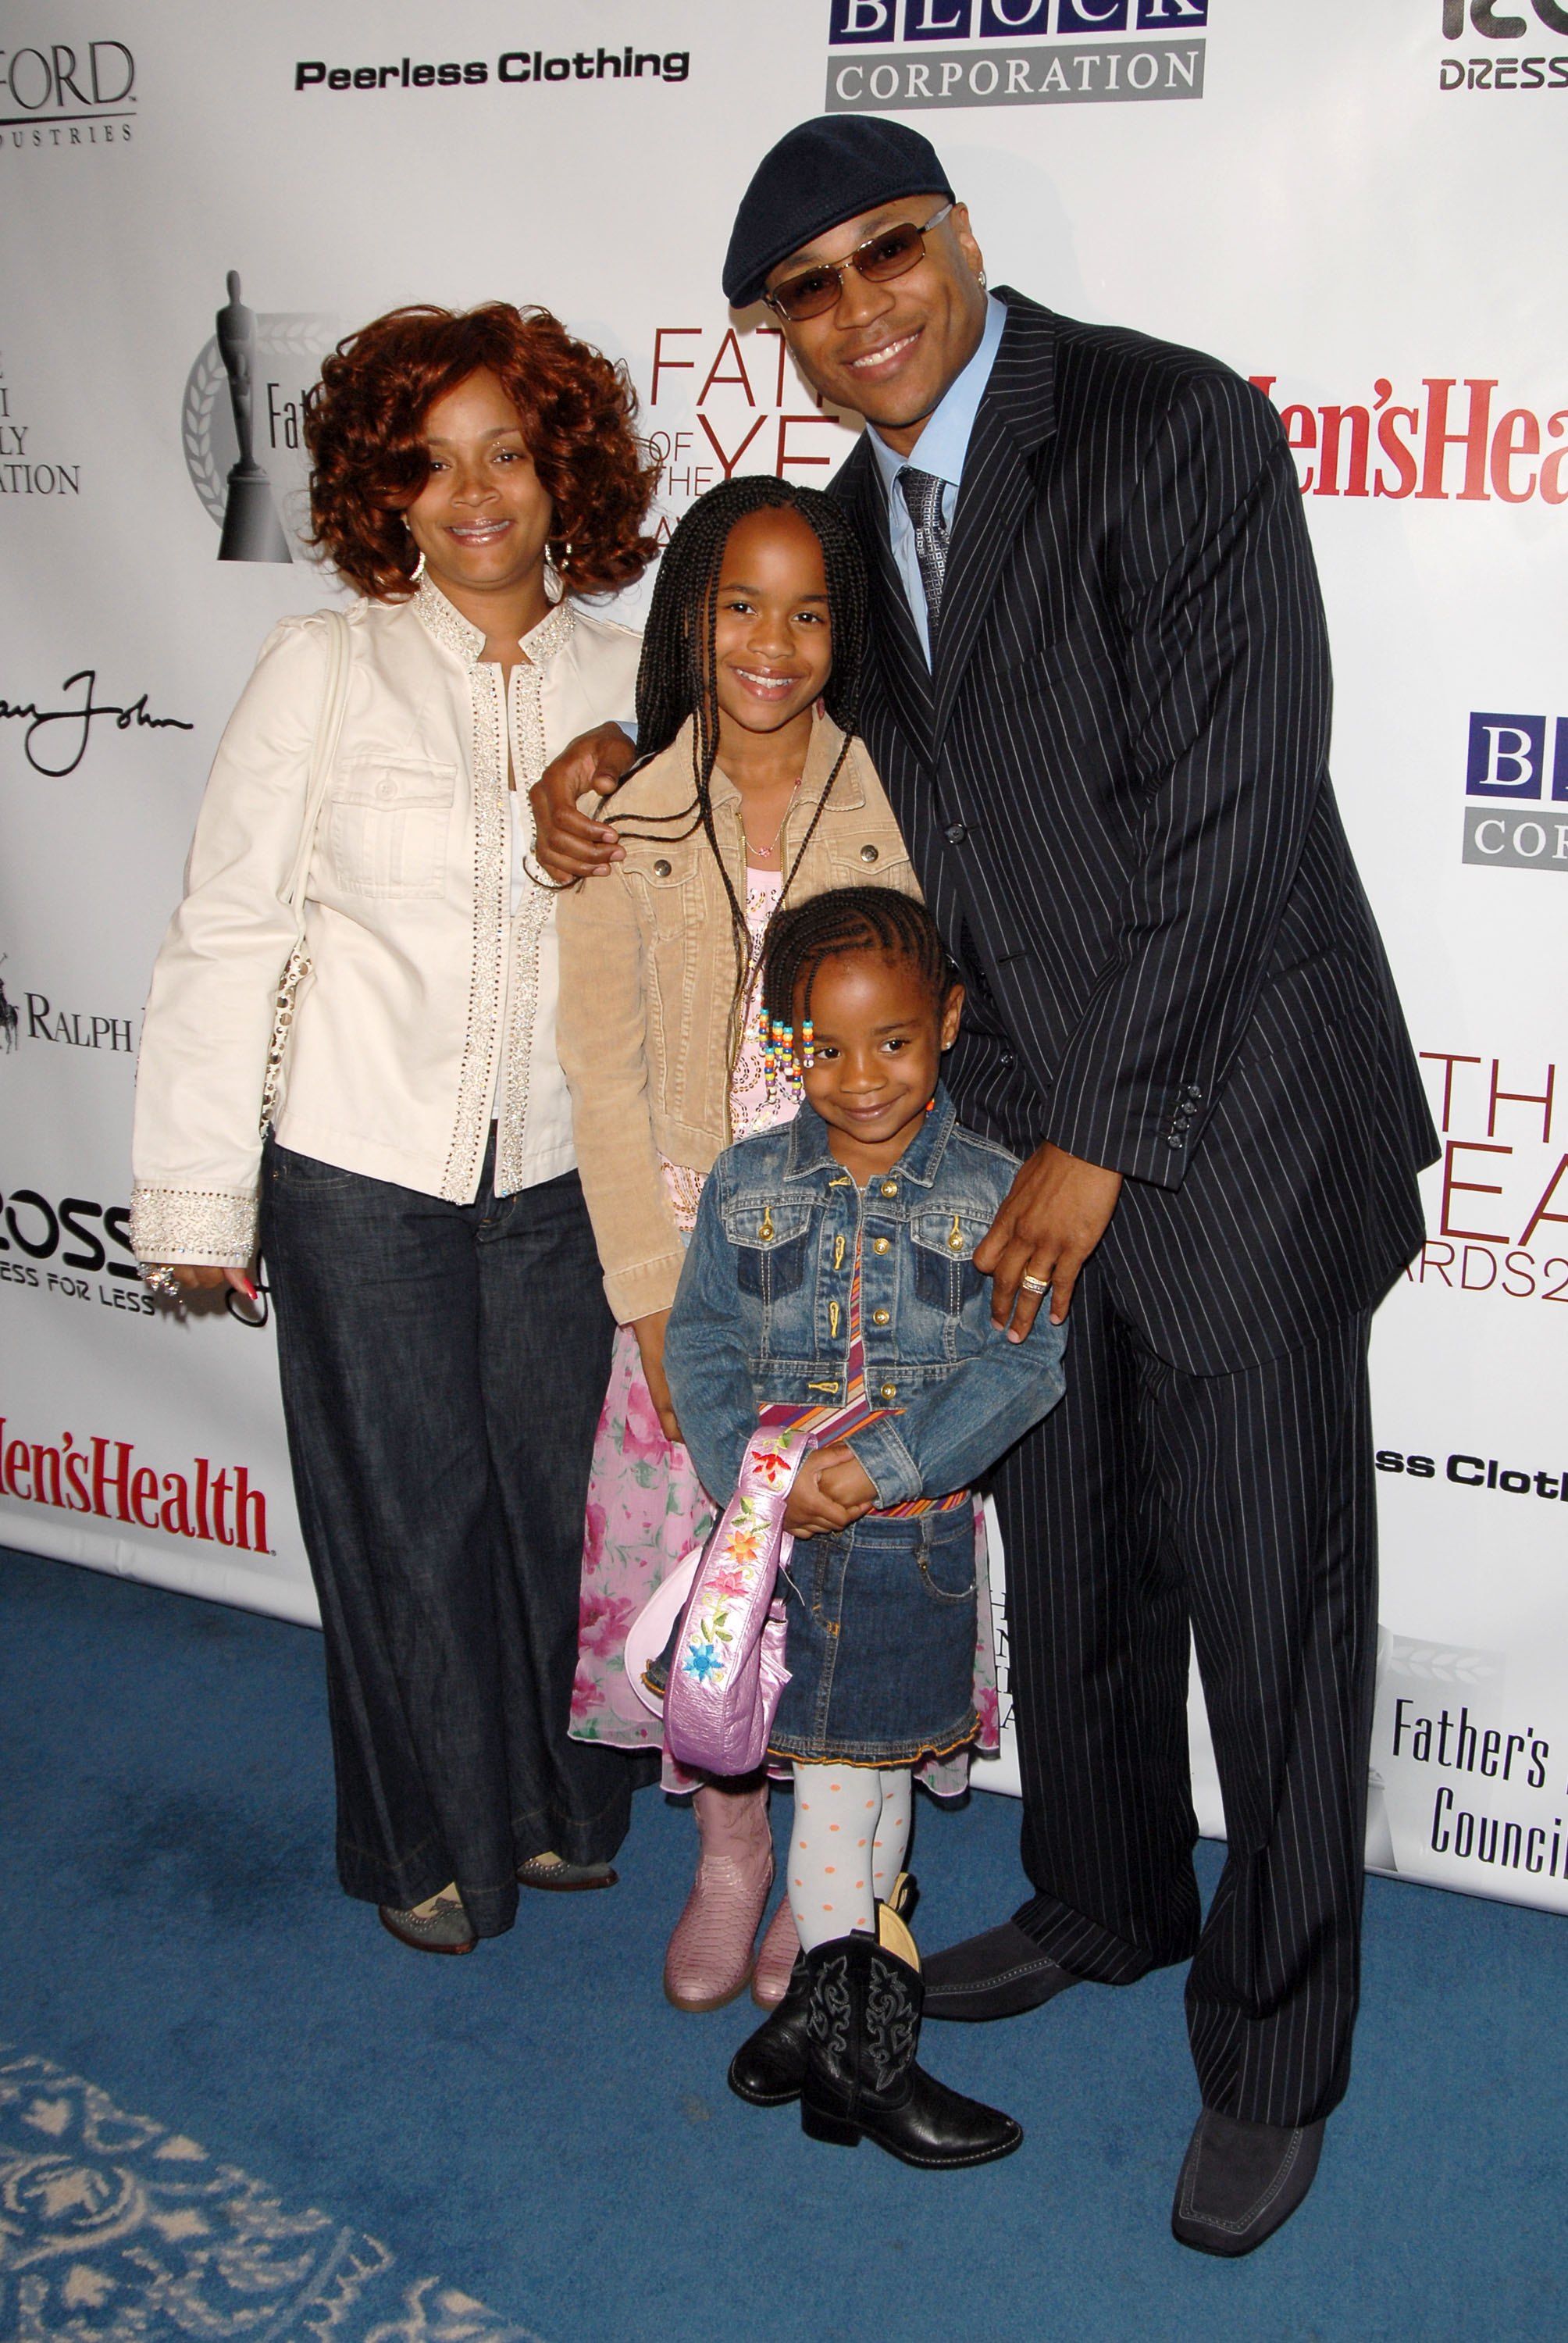 "NCIS: Los Angeles" actor LL Cool J and family at the Annual Father of the Year Awards on June 8, 2006 in N.Y. | Photo: Getty Images